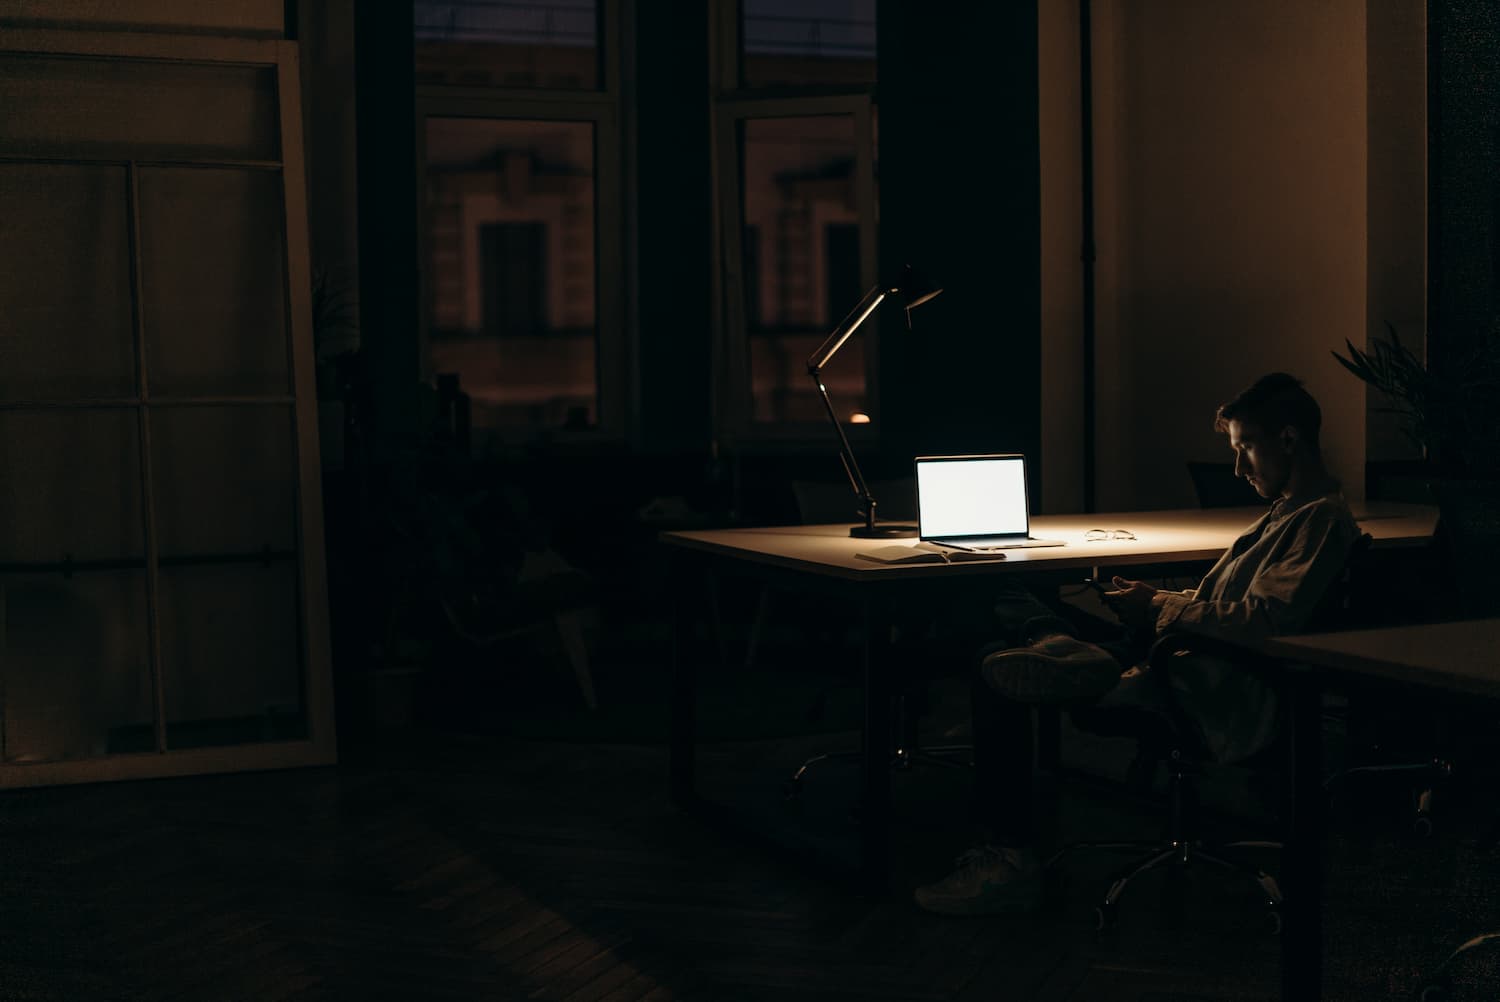  A worker sits alone at night in front of his computer